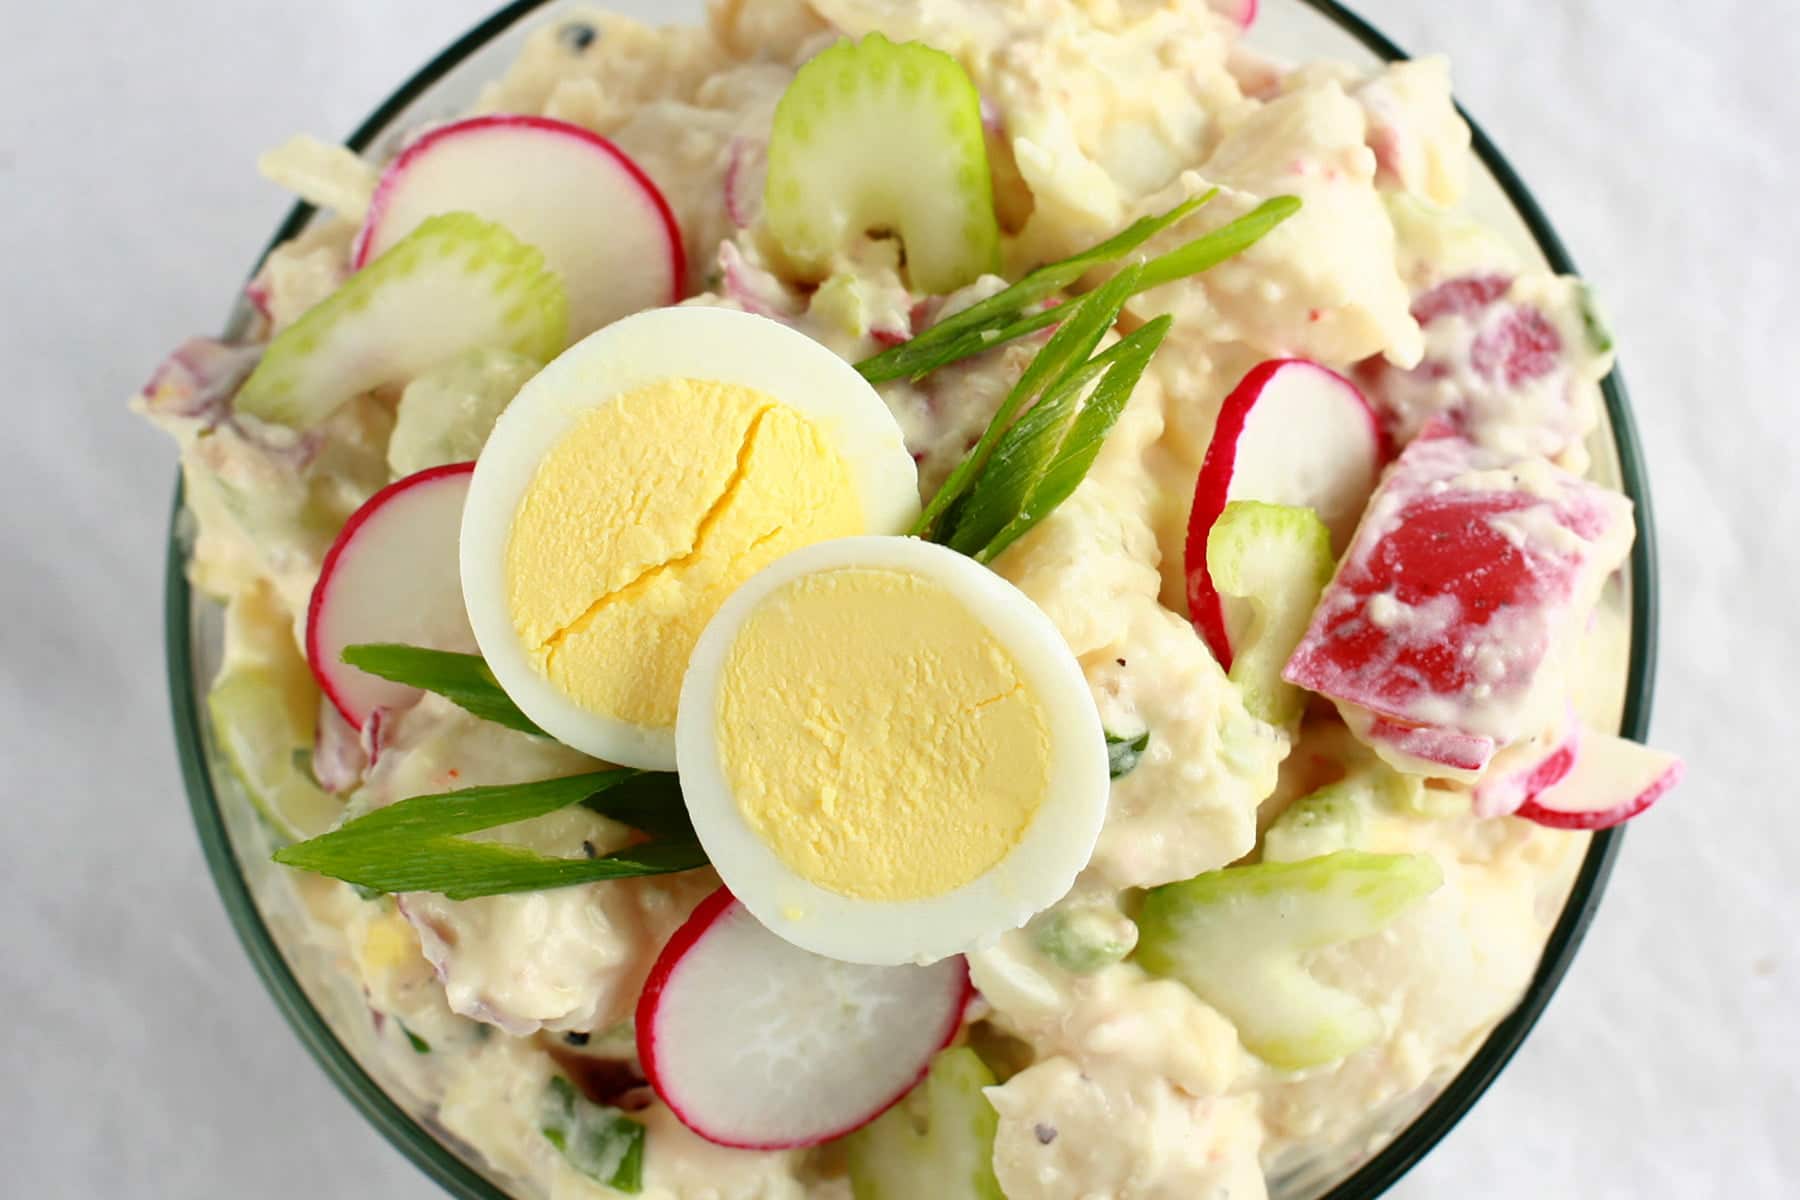 A bowl of Gramma's Potato Salad - a creamy potato salad with slices of celery, radish, green onion, and hardboiled egg visible.